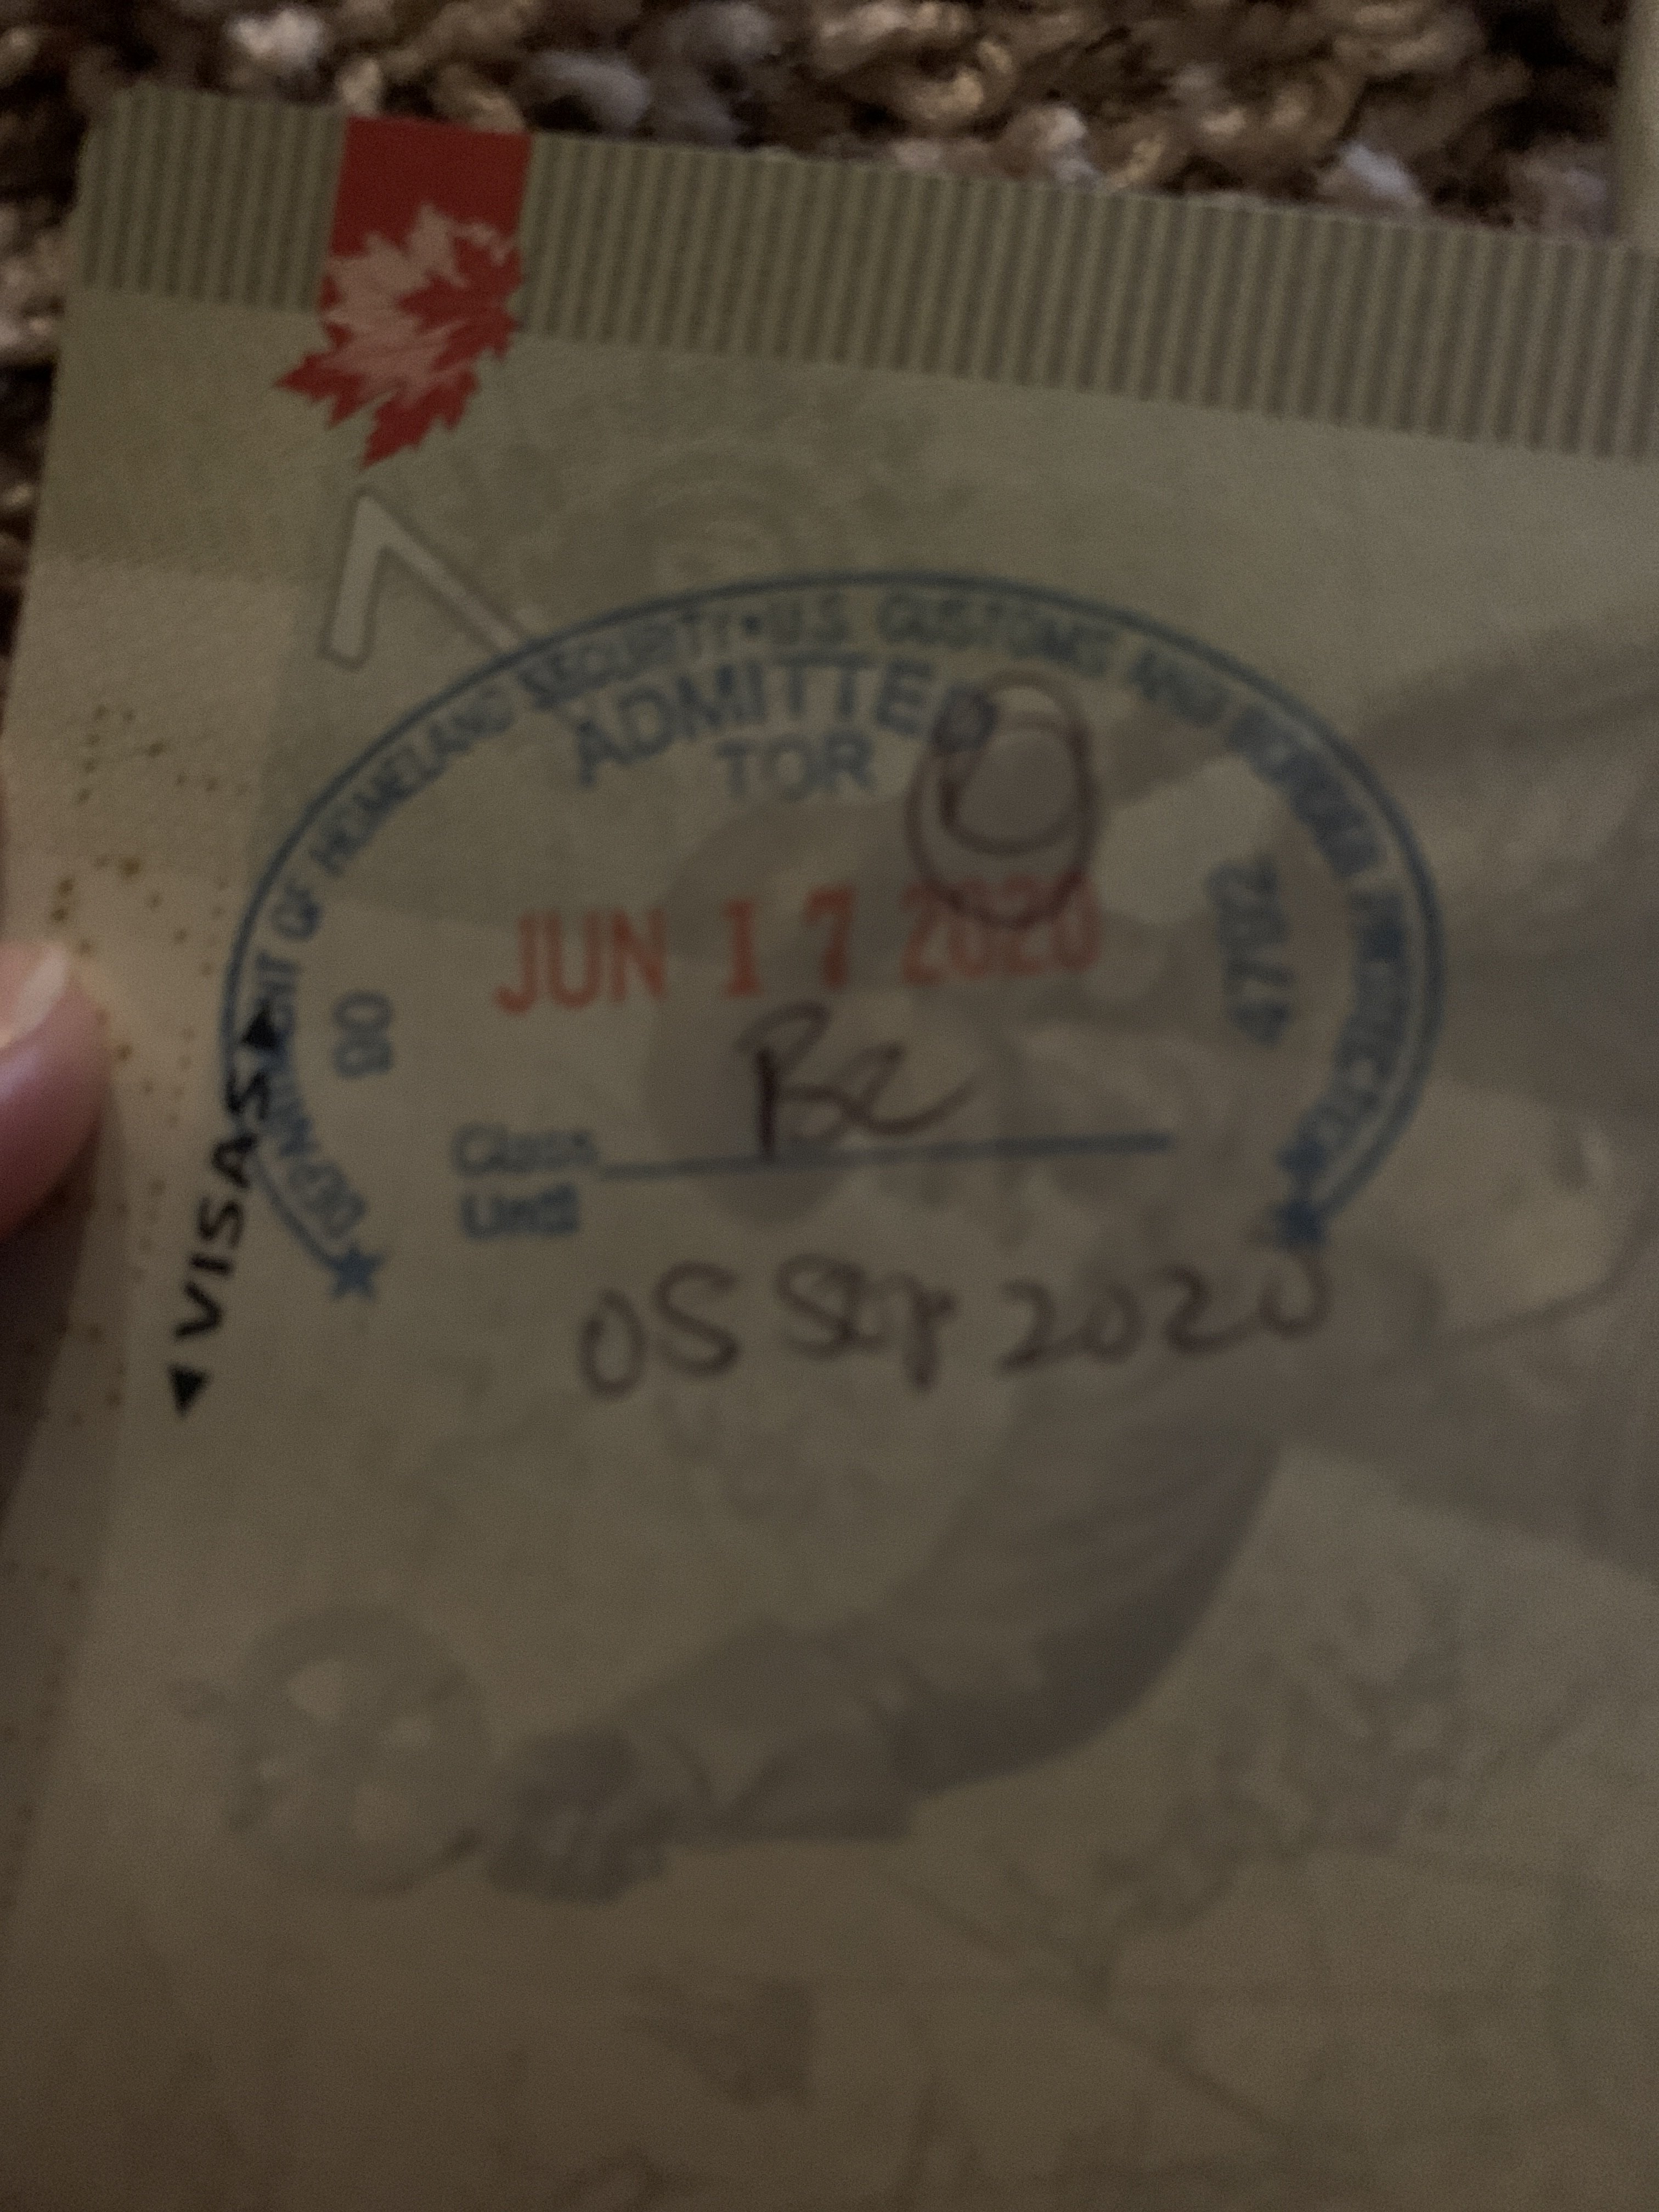 beneficiary's travel document number